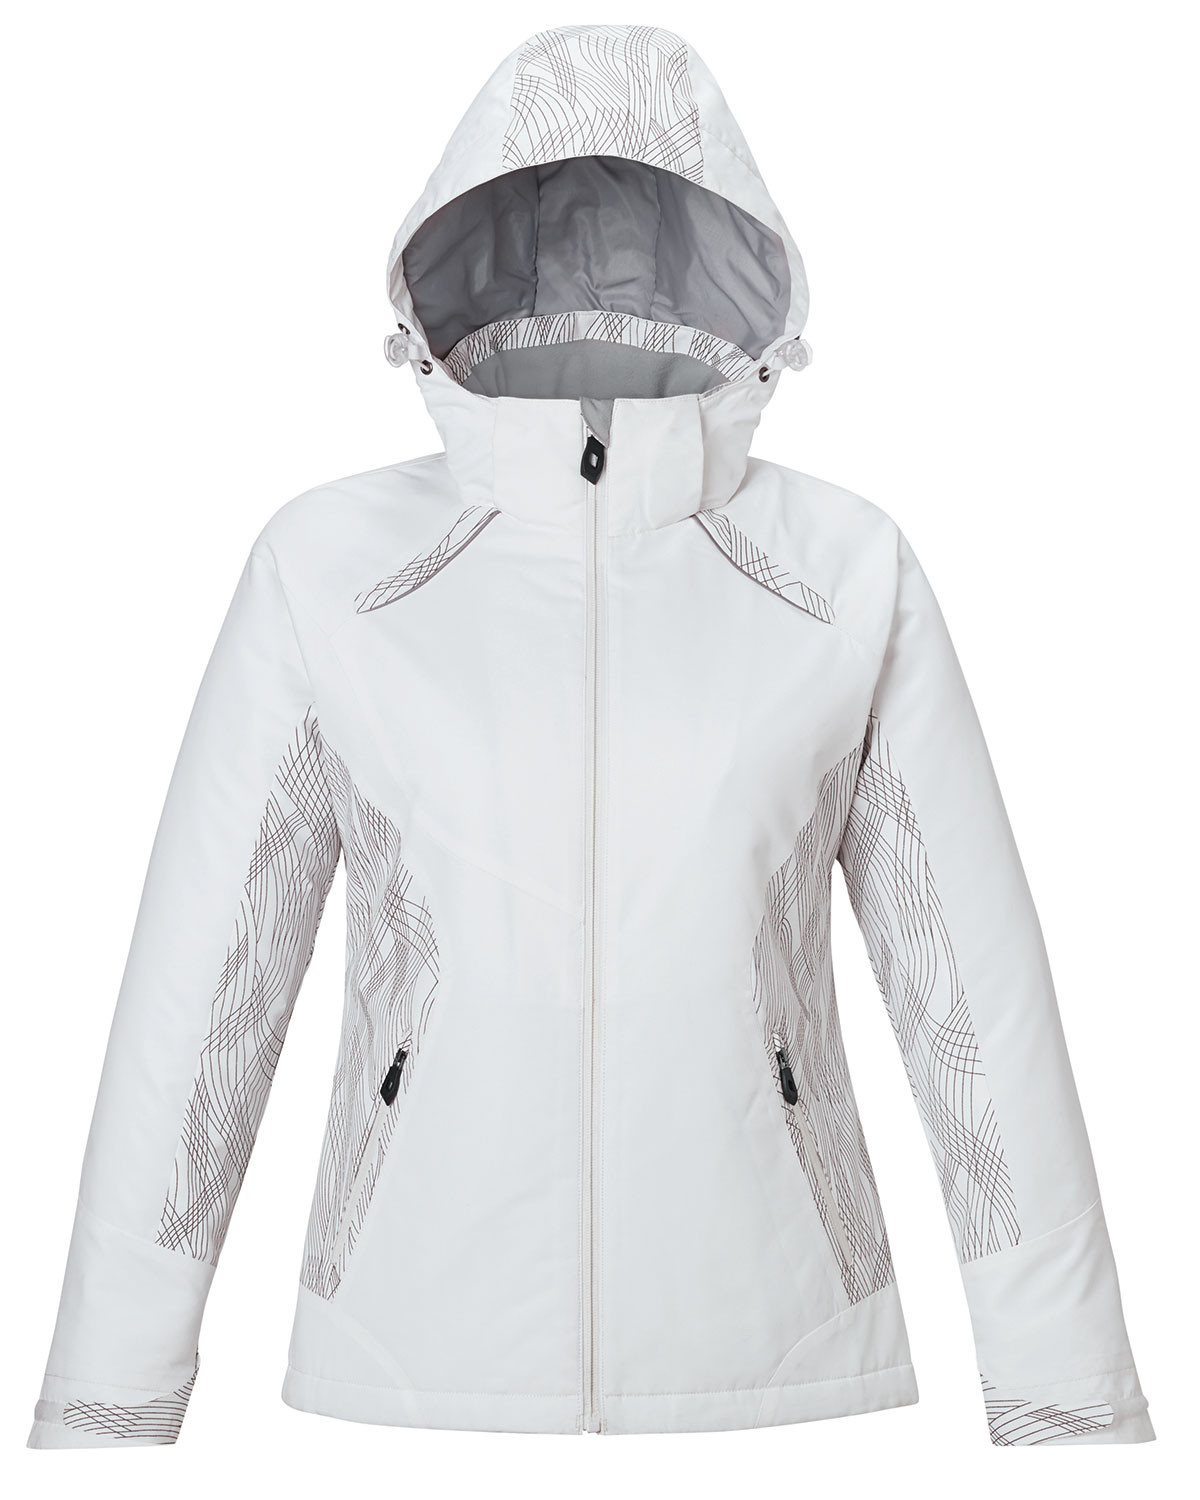 Ash City Insulated 78197 - Linear Ladies' Insulated Jacket With Print